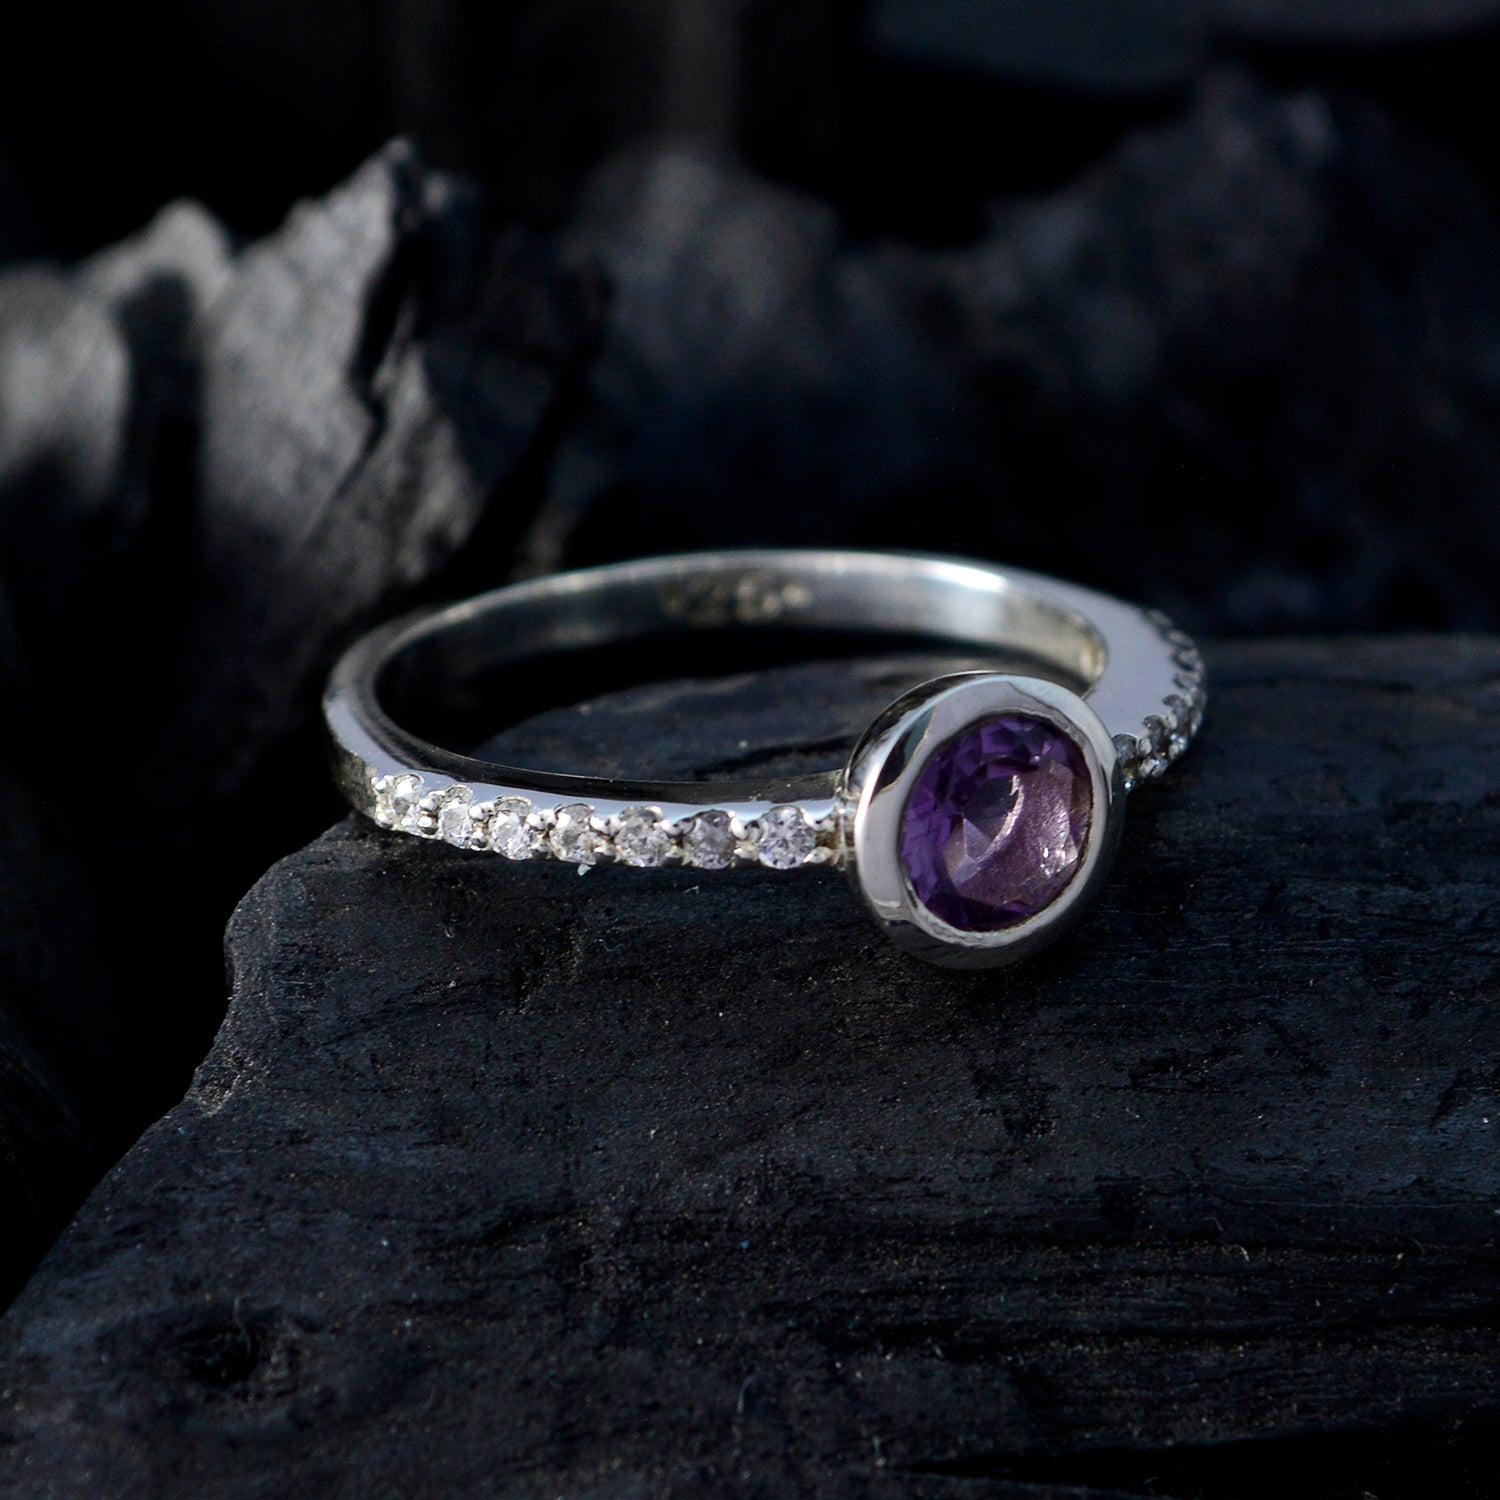 Natural Gemstone Amethyst 925 Sterling Silver Ring 1920s Jewelry